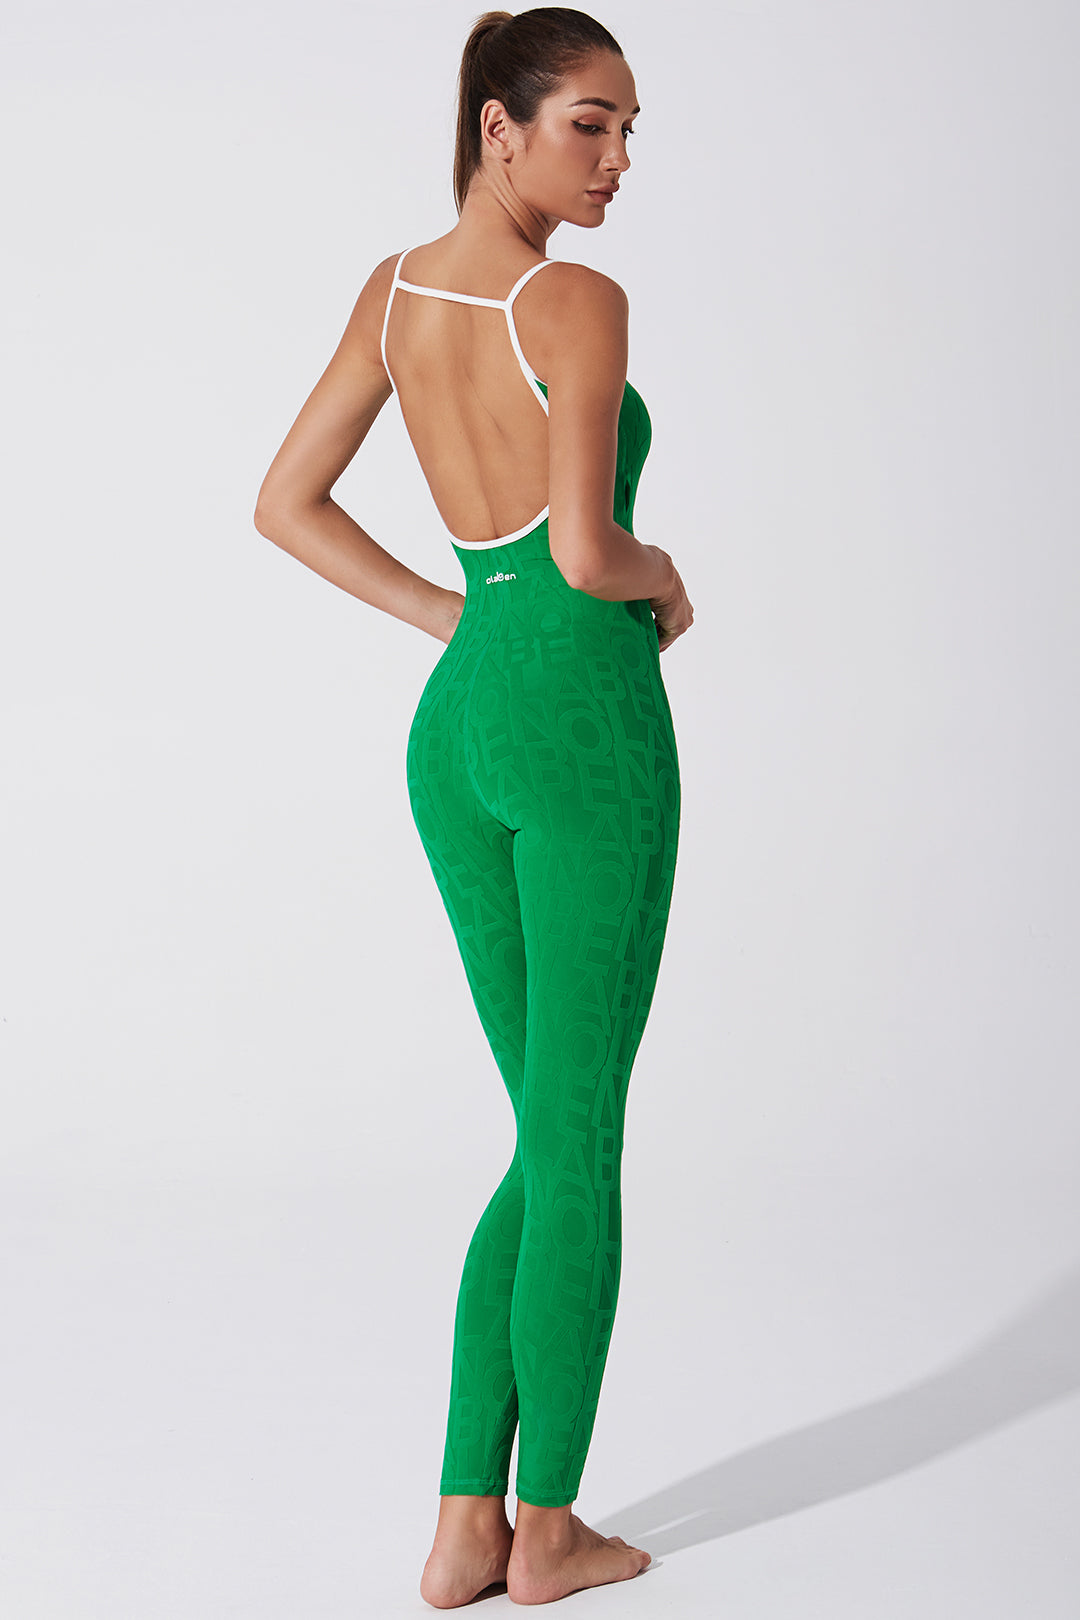 A stylish women's jumpsuit in dark green color.